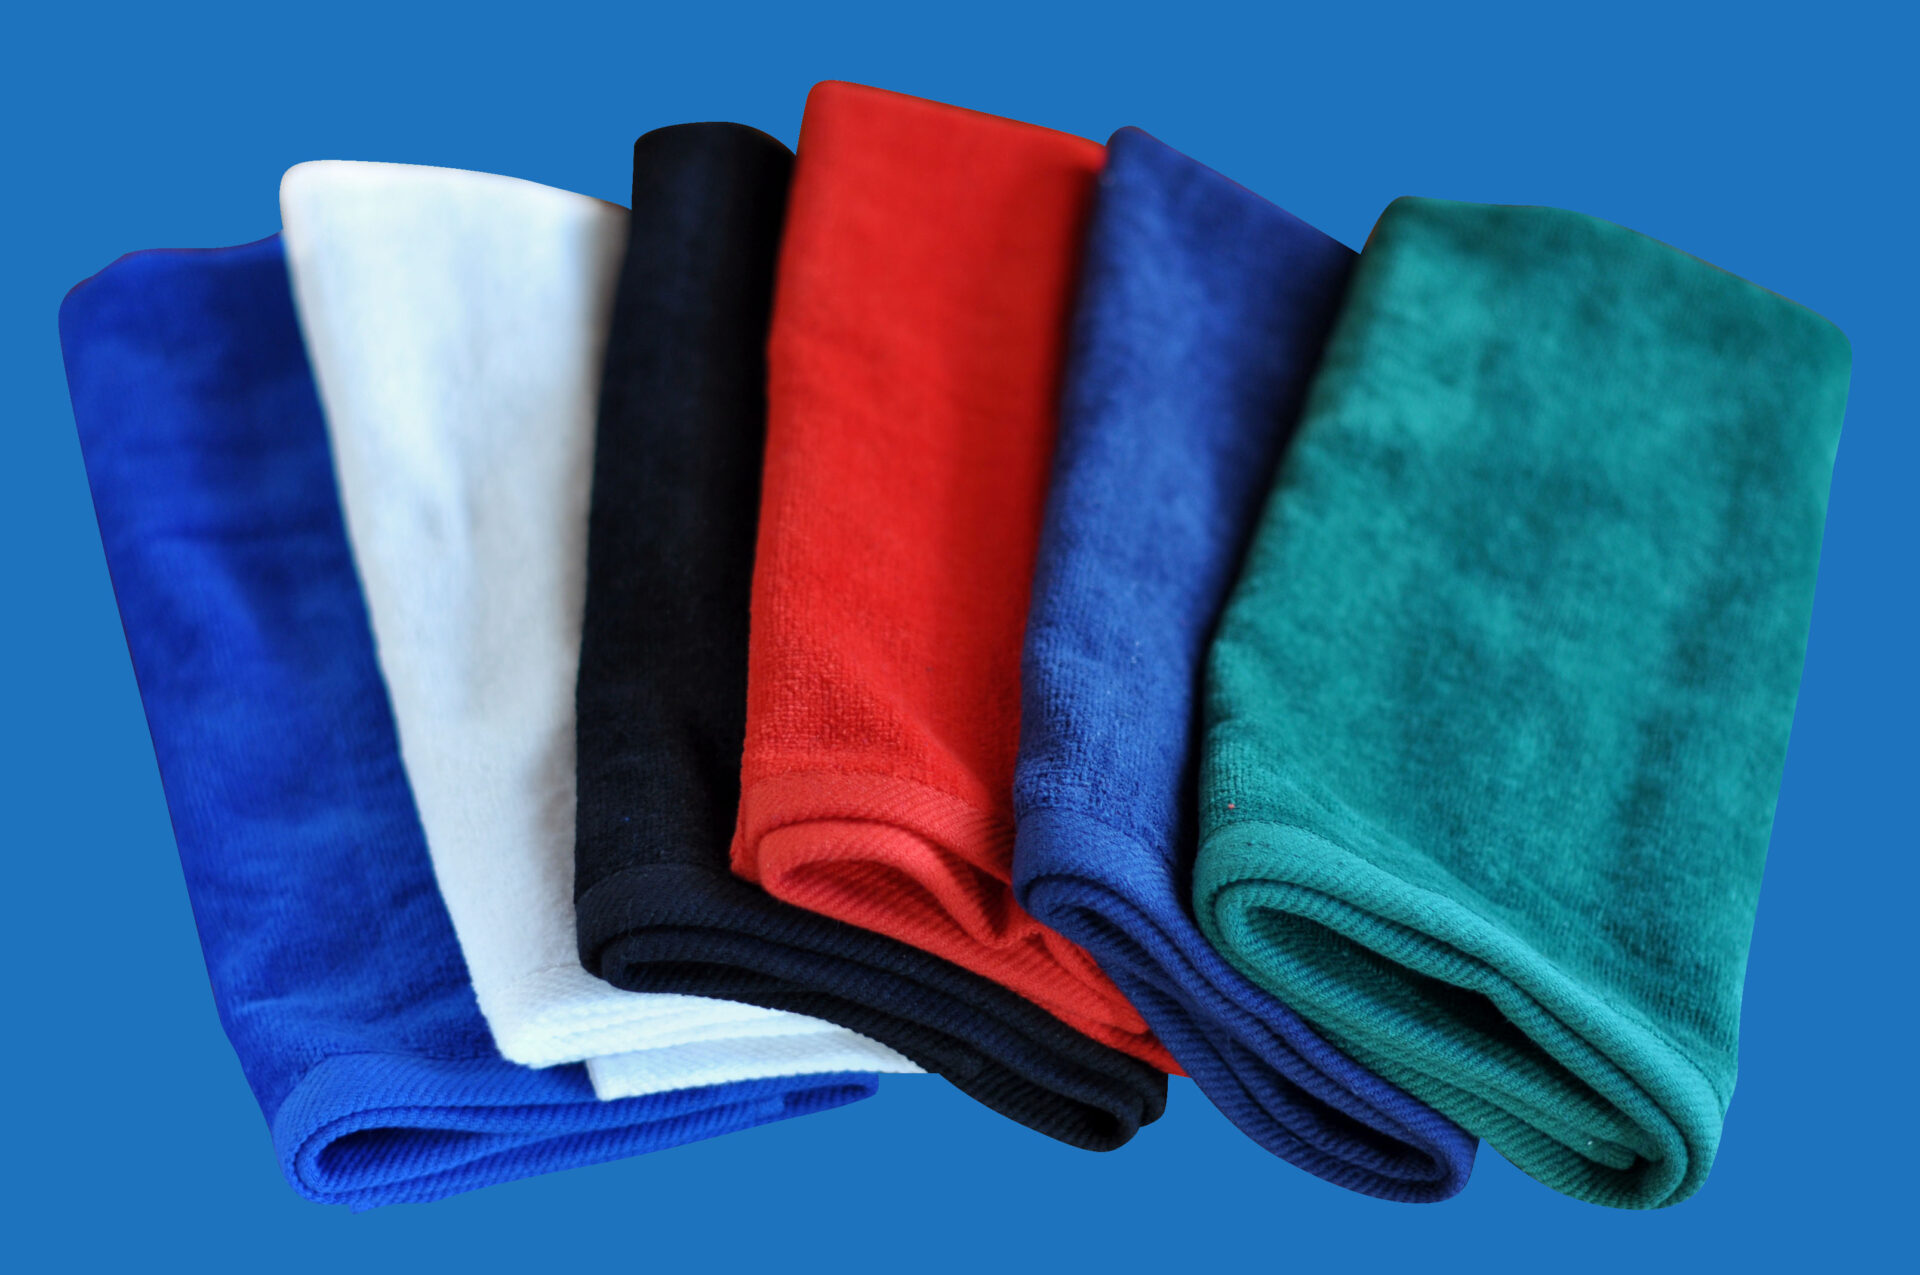 17 x 40 320GSM Waffle Weave Caddy Golf Towel - 8 Colors